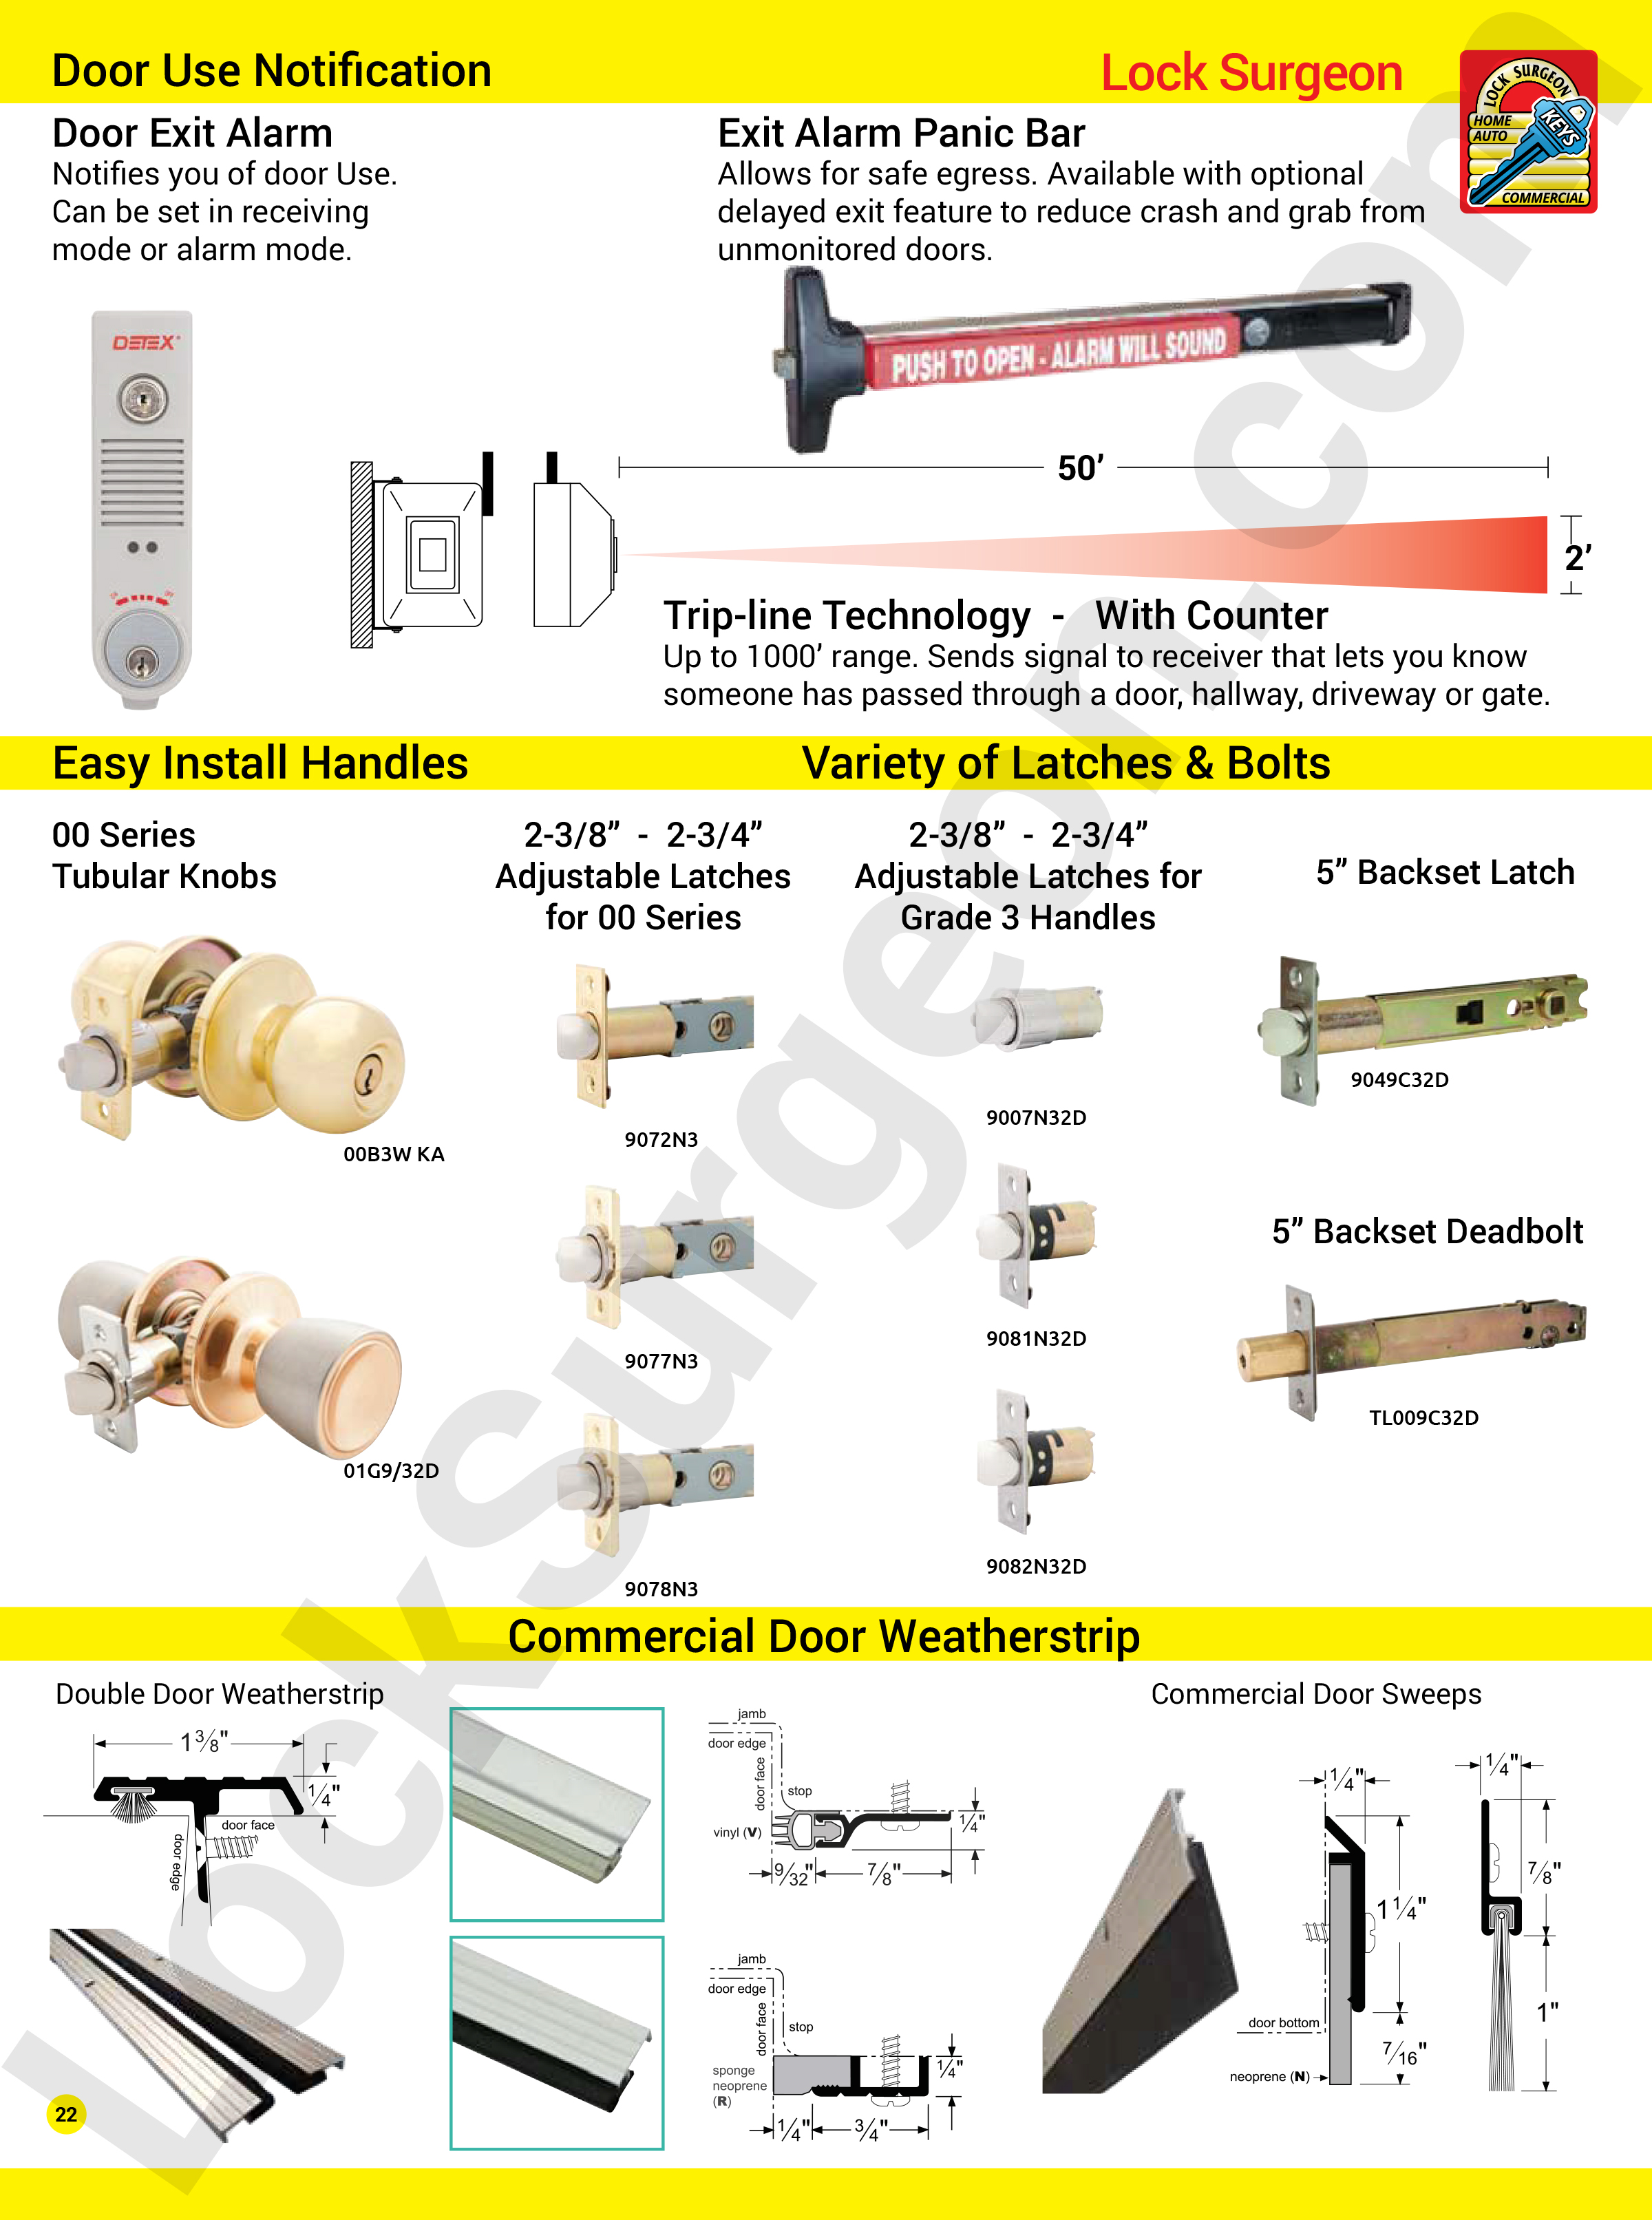 Security and Hardware products for commercial doors installed or repaired by Lock Surgeon or Door Surgeon trained technicians. Lock Surgeon carry door exit alarms, exit alarm panic bars, trip-line technology with counters, easy install handles, door weatherstrip and a variety of latches and bolts.